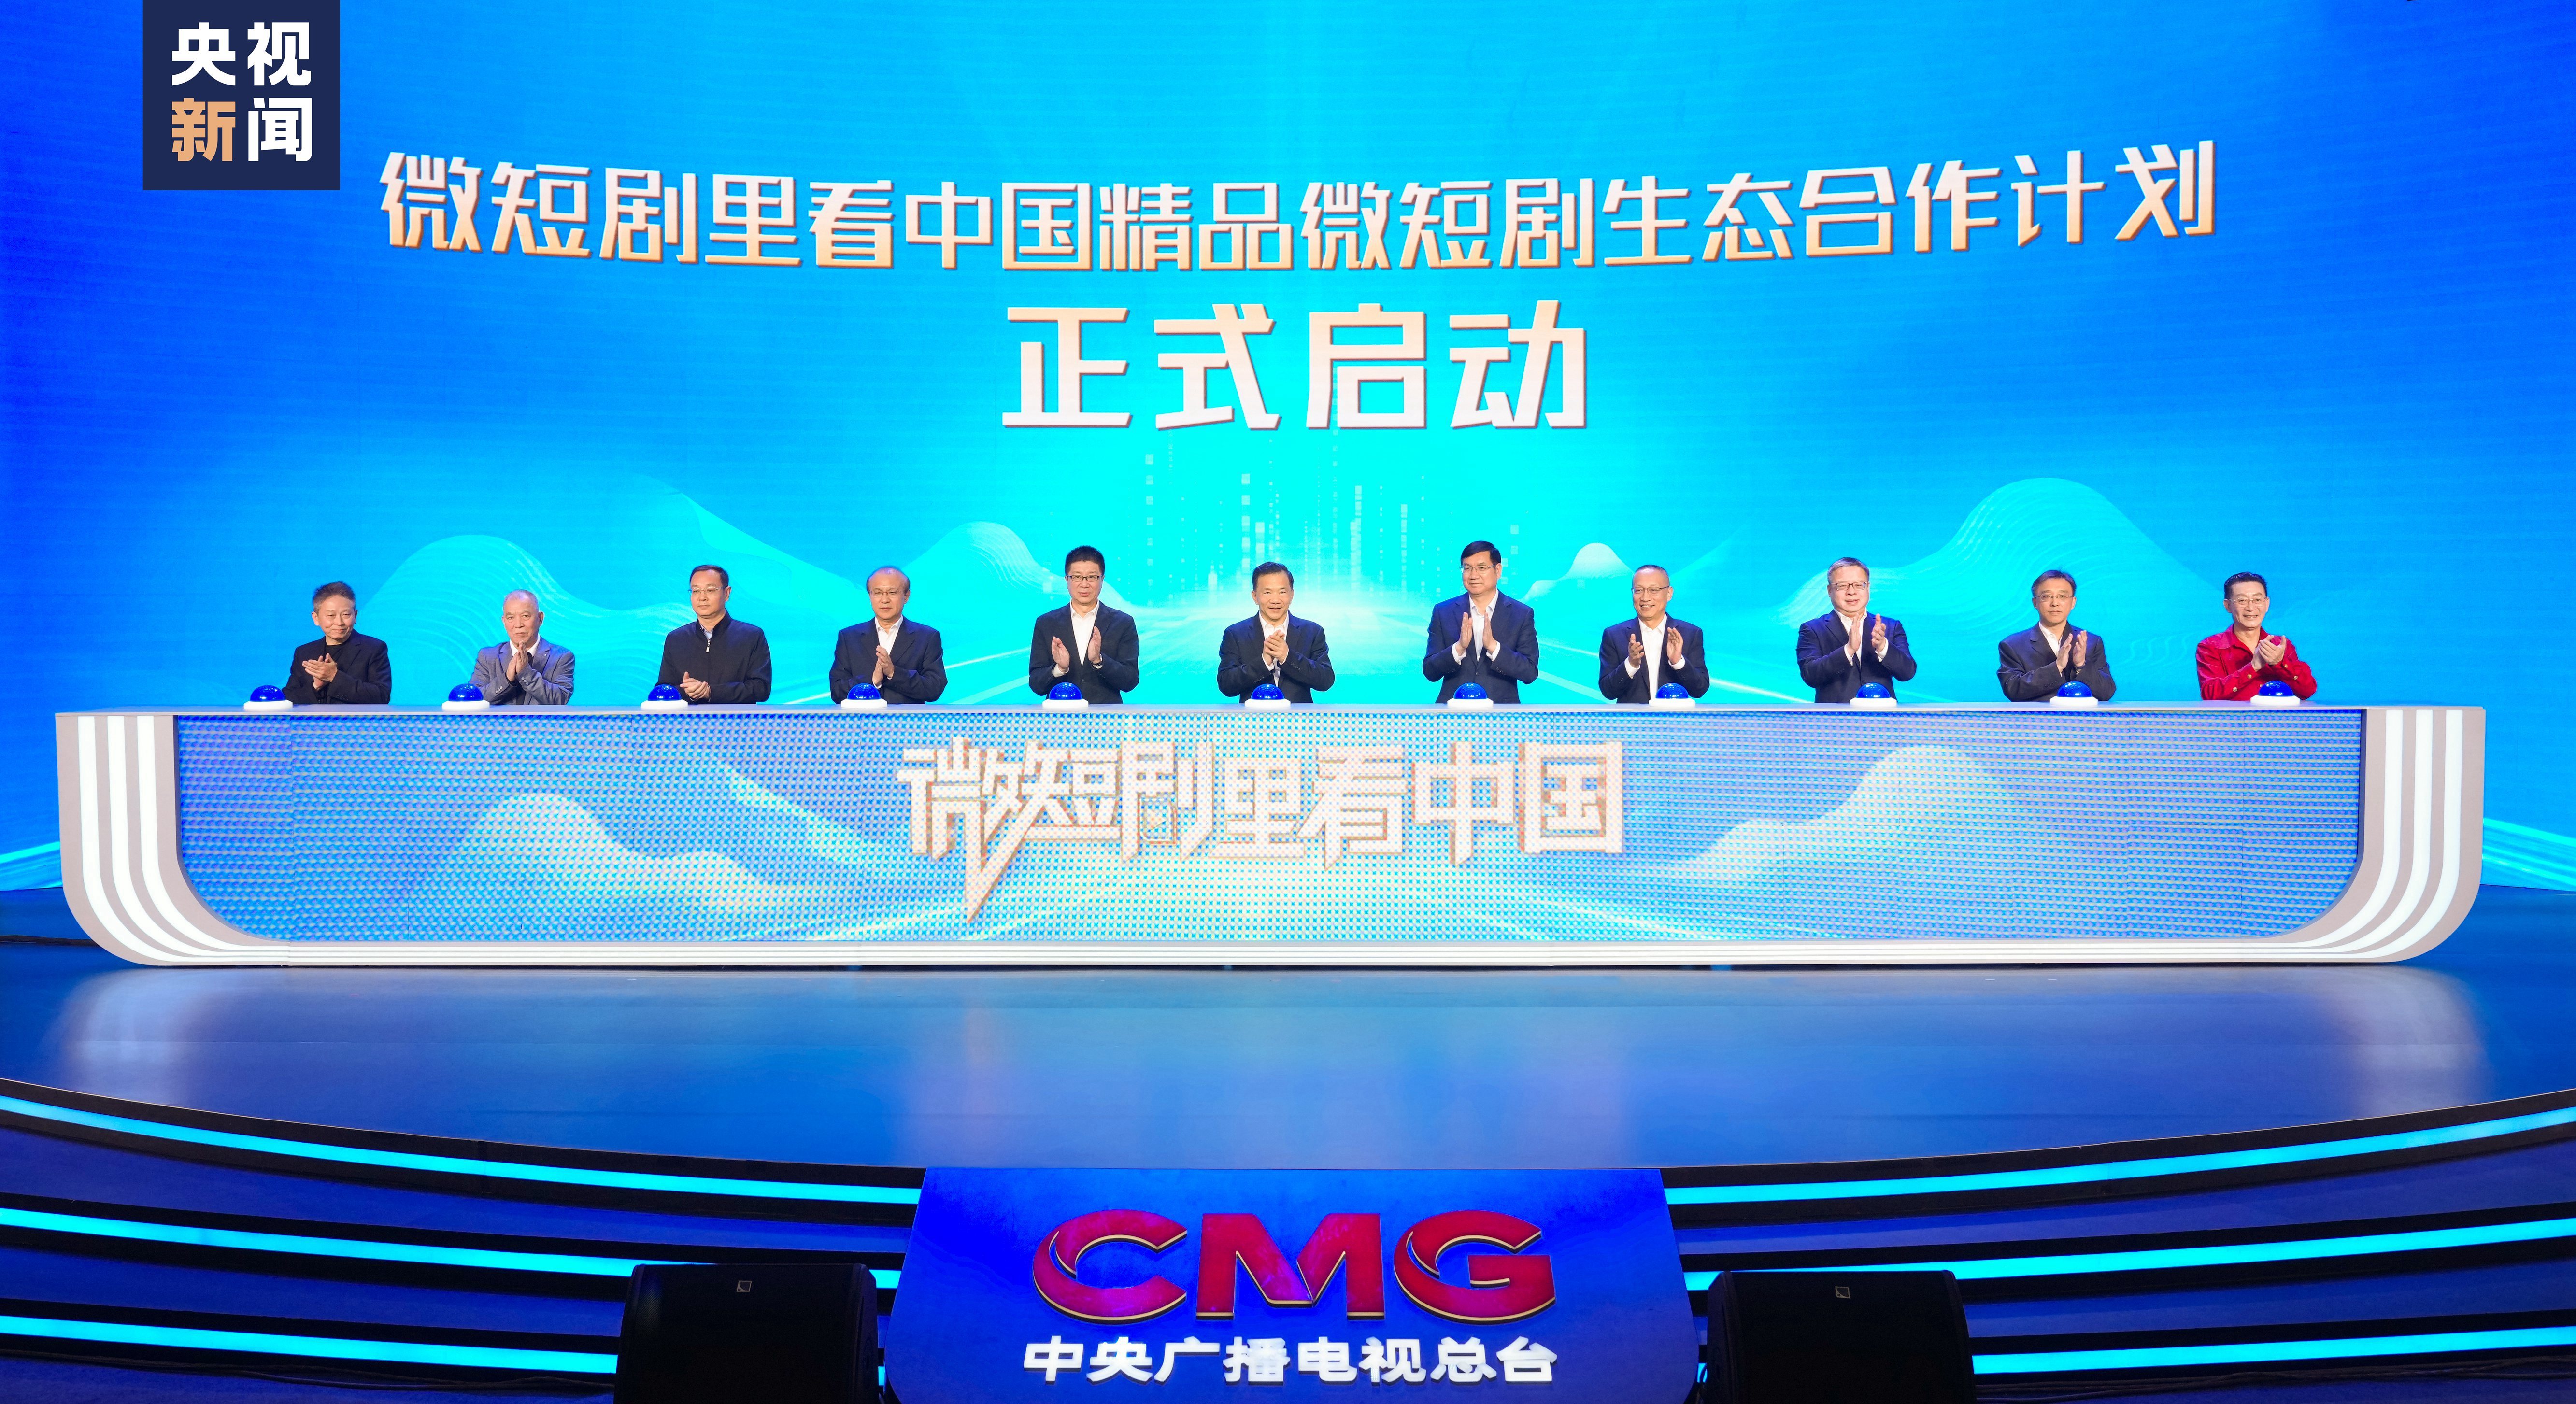 On April 30, China Media Group (CMG) unveiled its micro-dramas cooperation plan named 